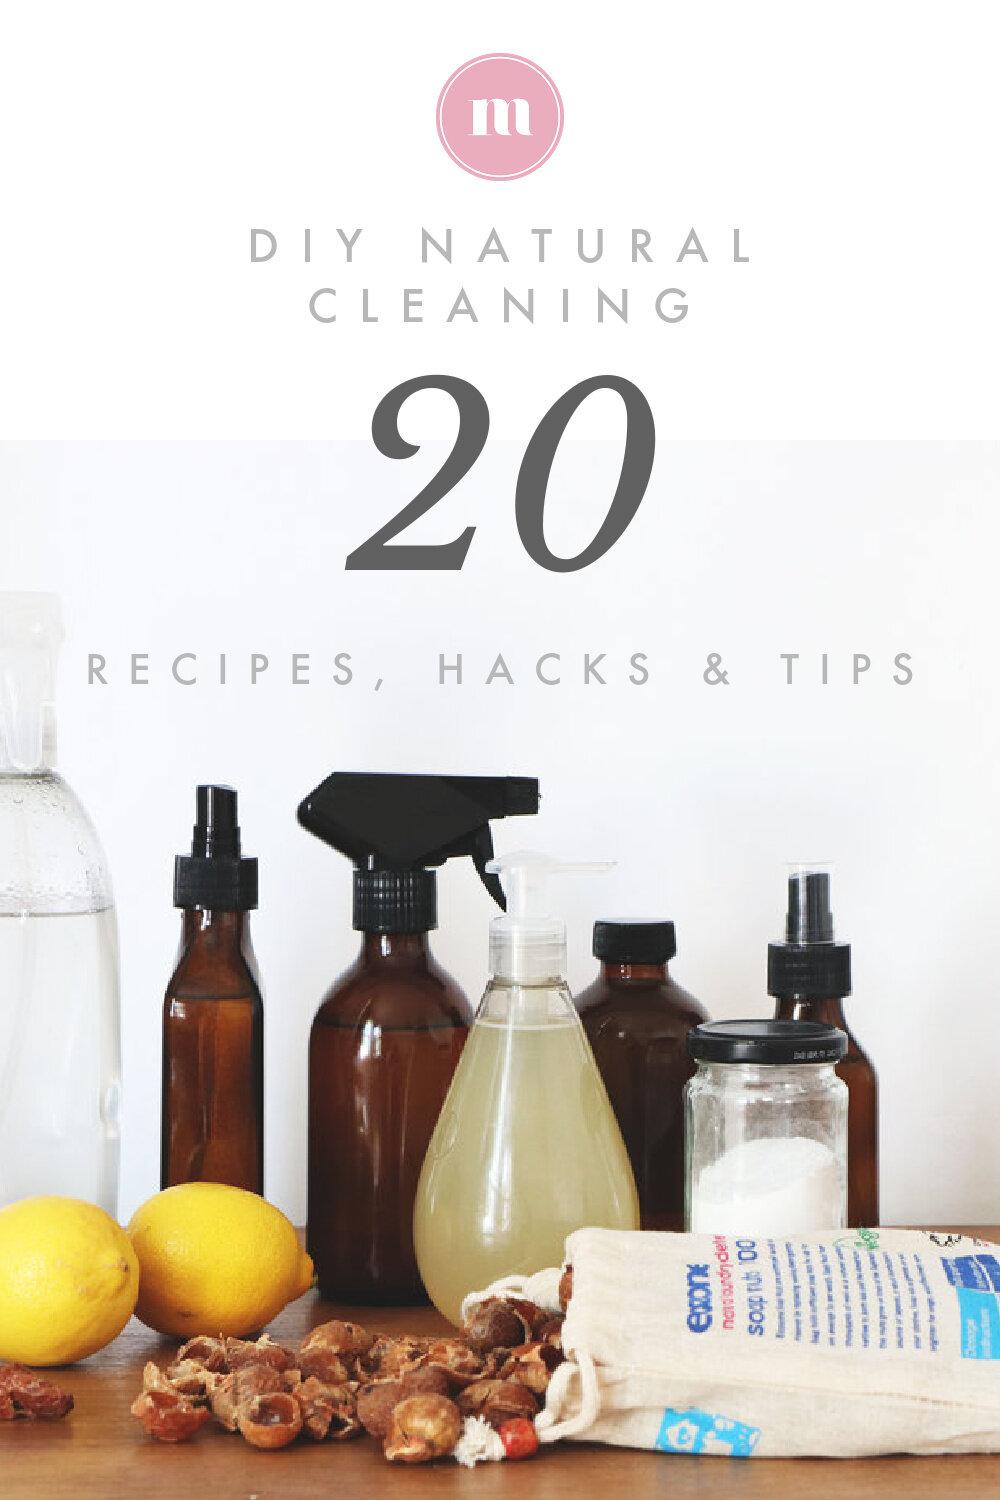 DIY Natural Cleaning Products: Your Guide to Safe, Eco-Friendly Solutions